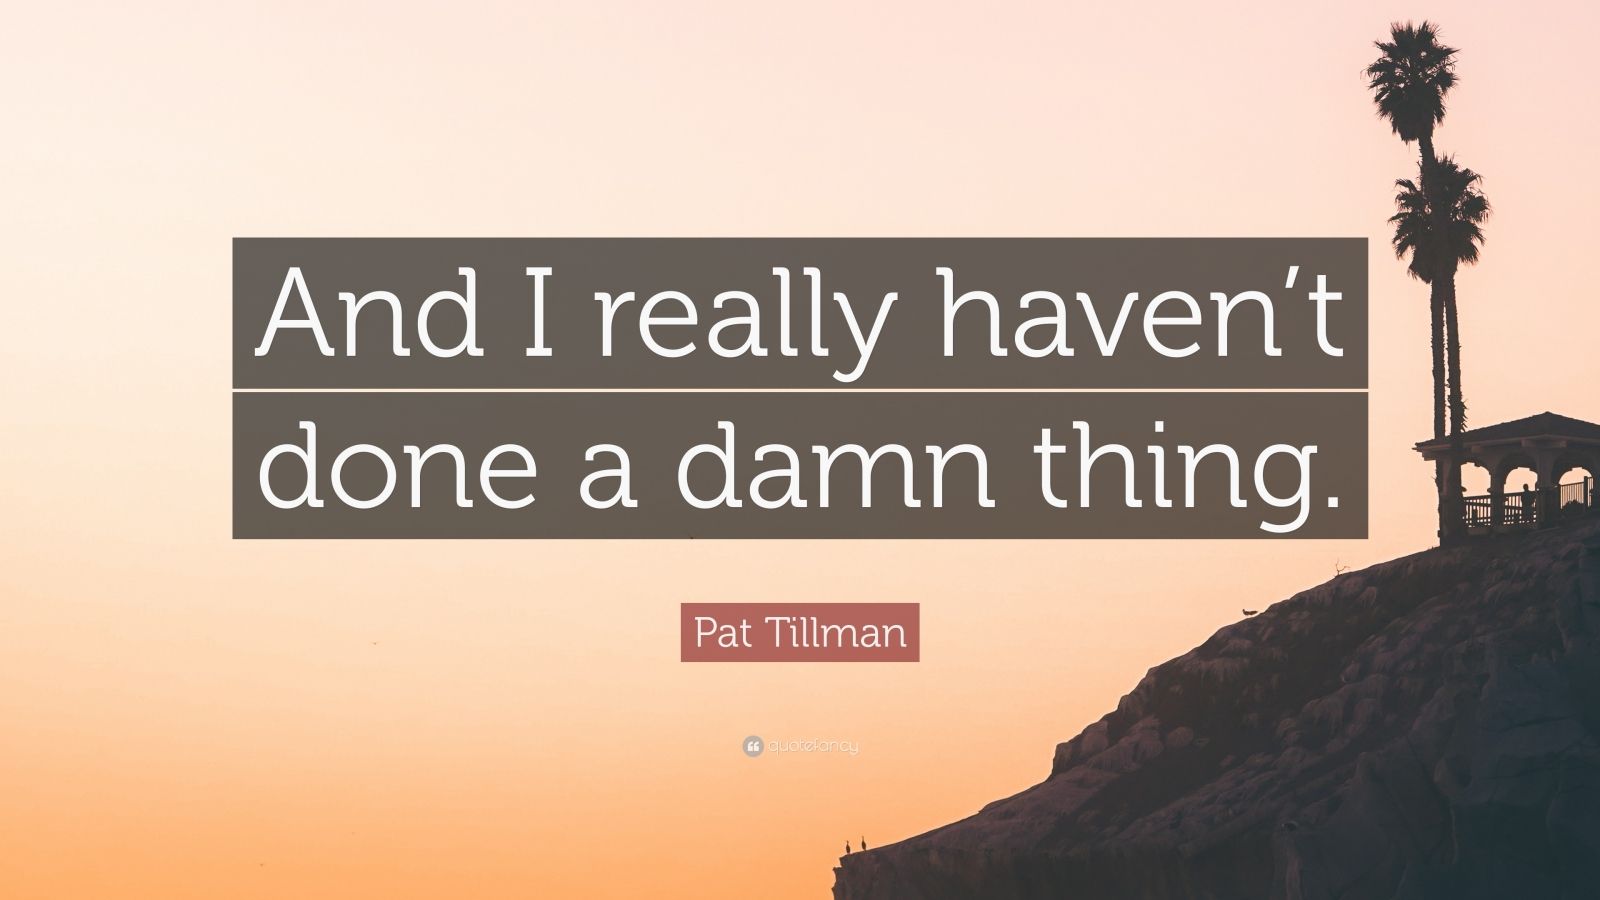 Pat Tillman Quote: “And I really haven’t done a damn thing.” (10